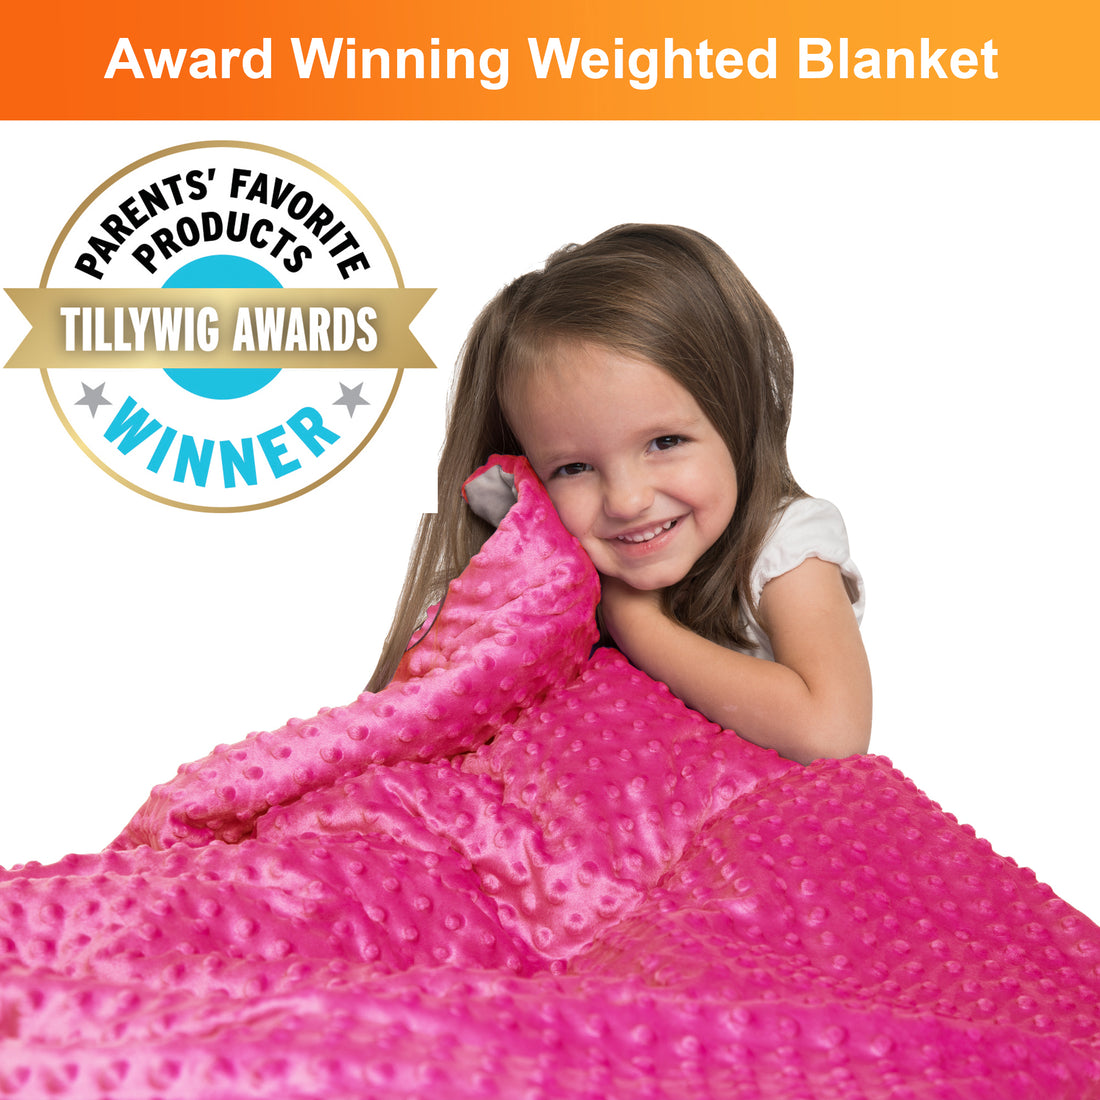 Why buy a new weighted blanket for your kids this season?